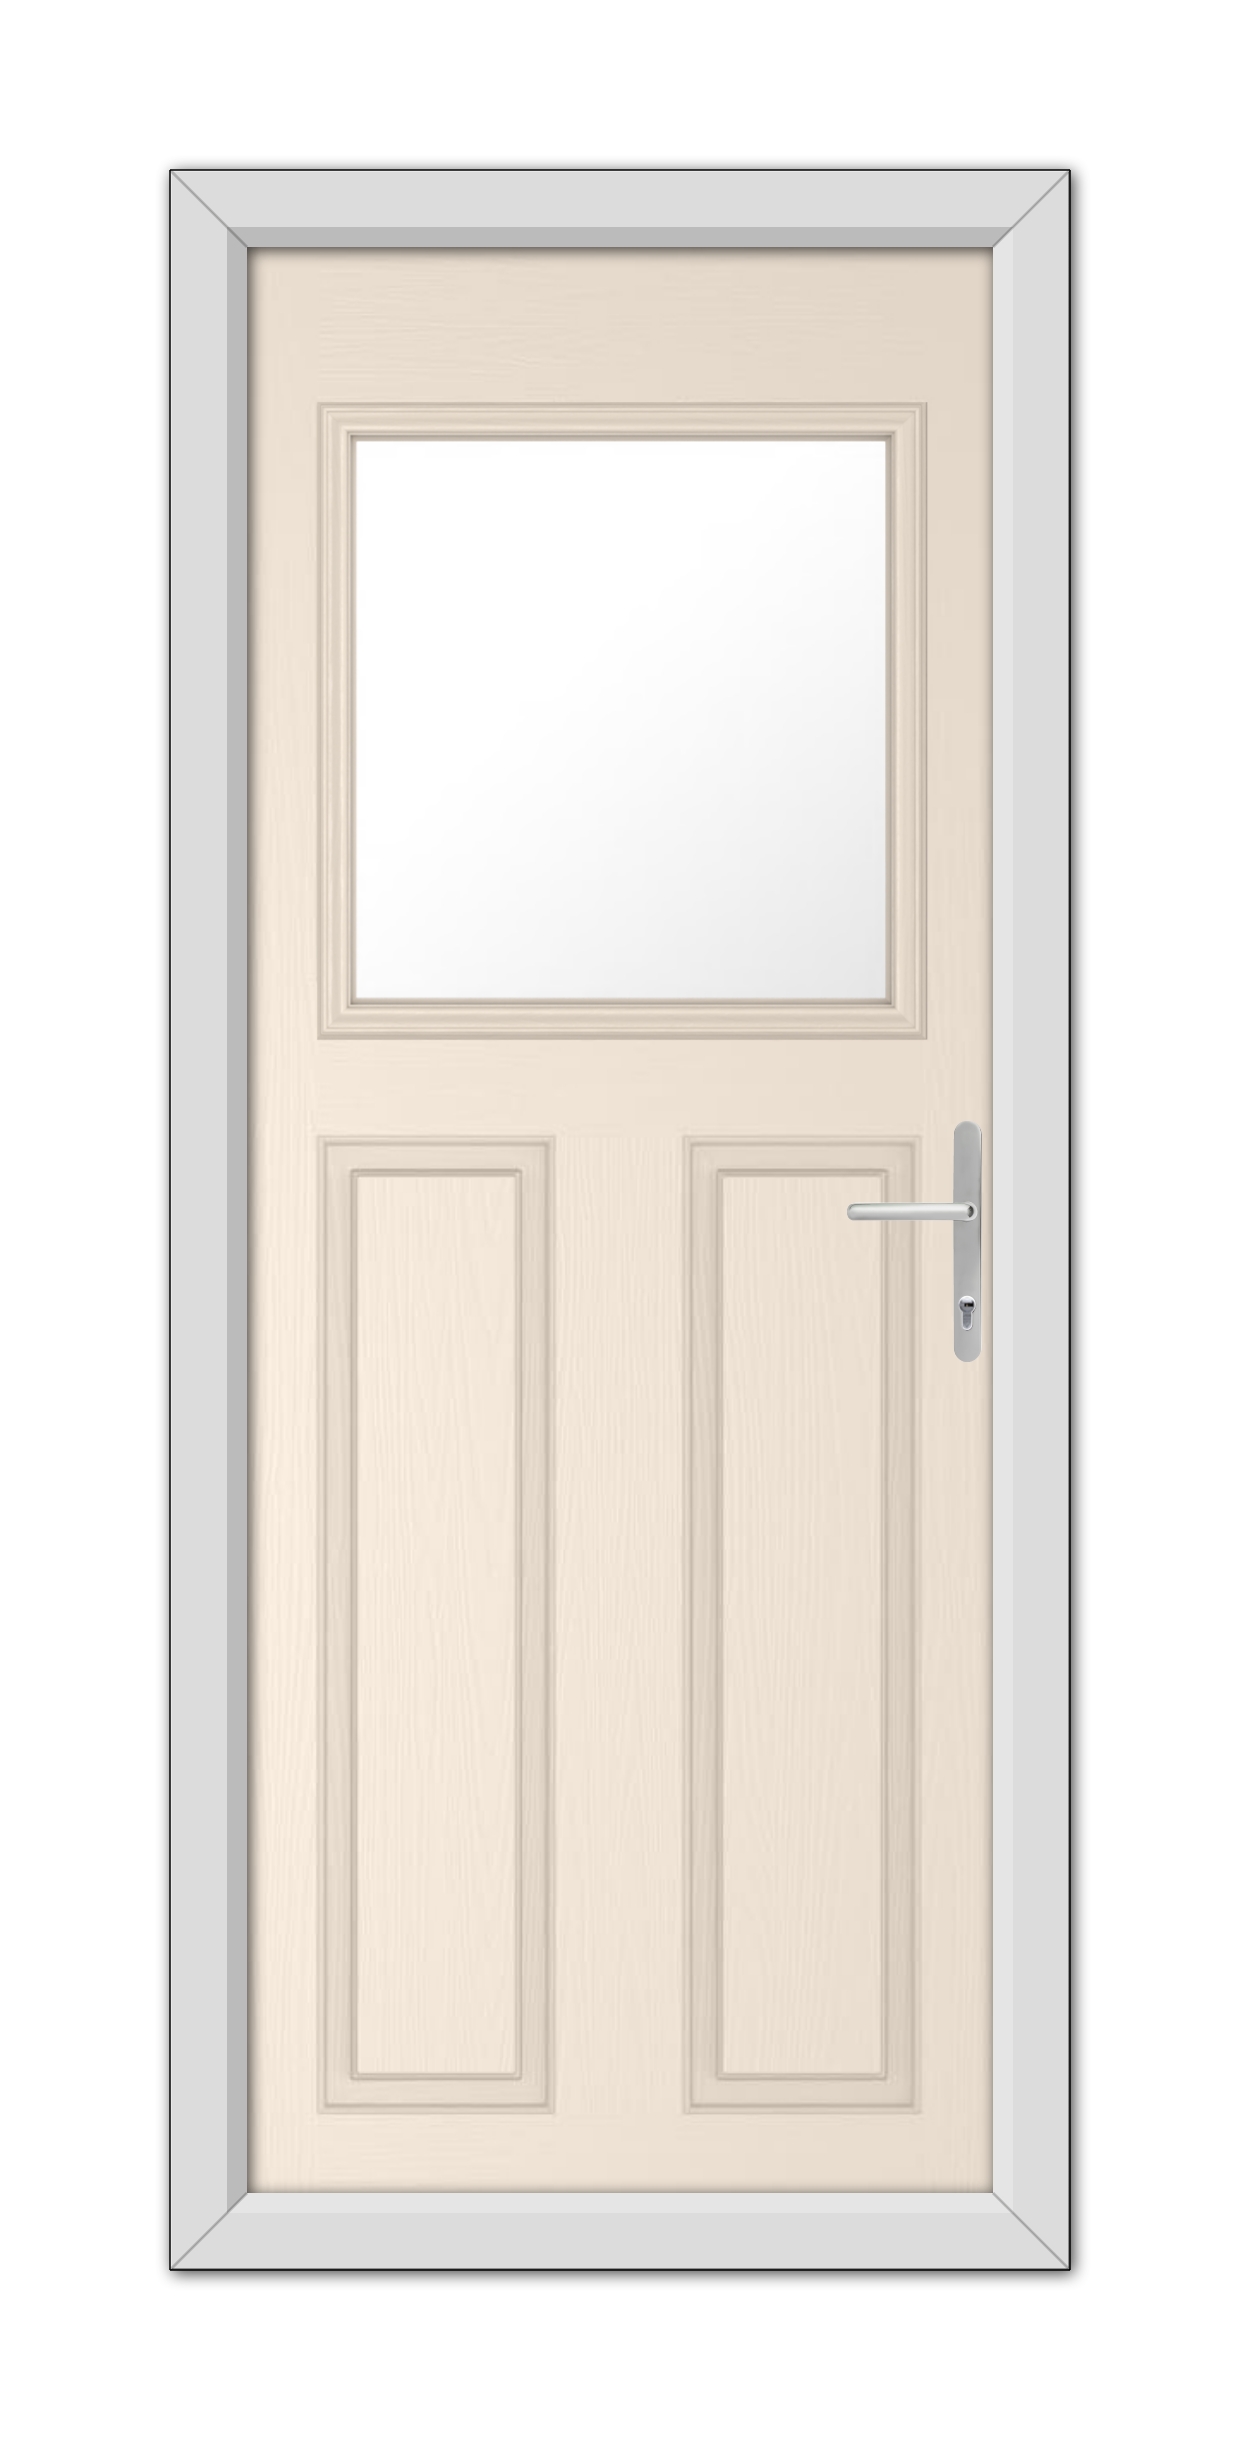 A Cream Axwell Composite Door 48mm Timber Core with a light wood finish, featuring a small rectangular window at the top and a metal handle on the right side, set within a gray frame.